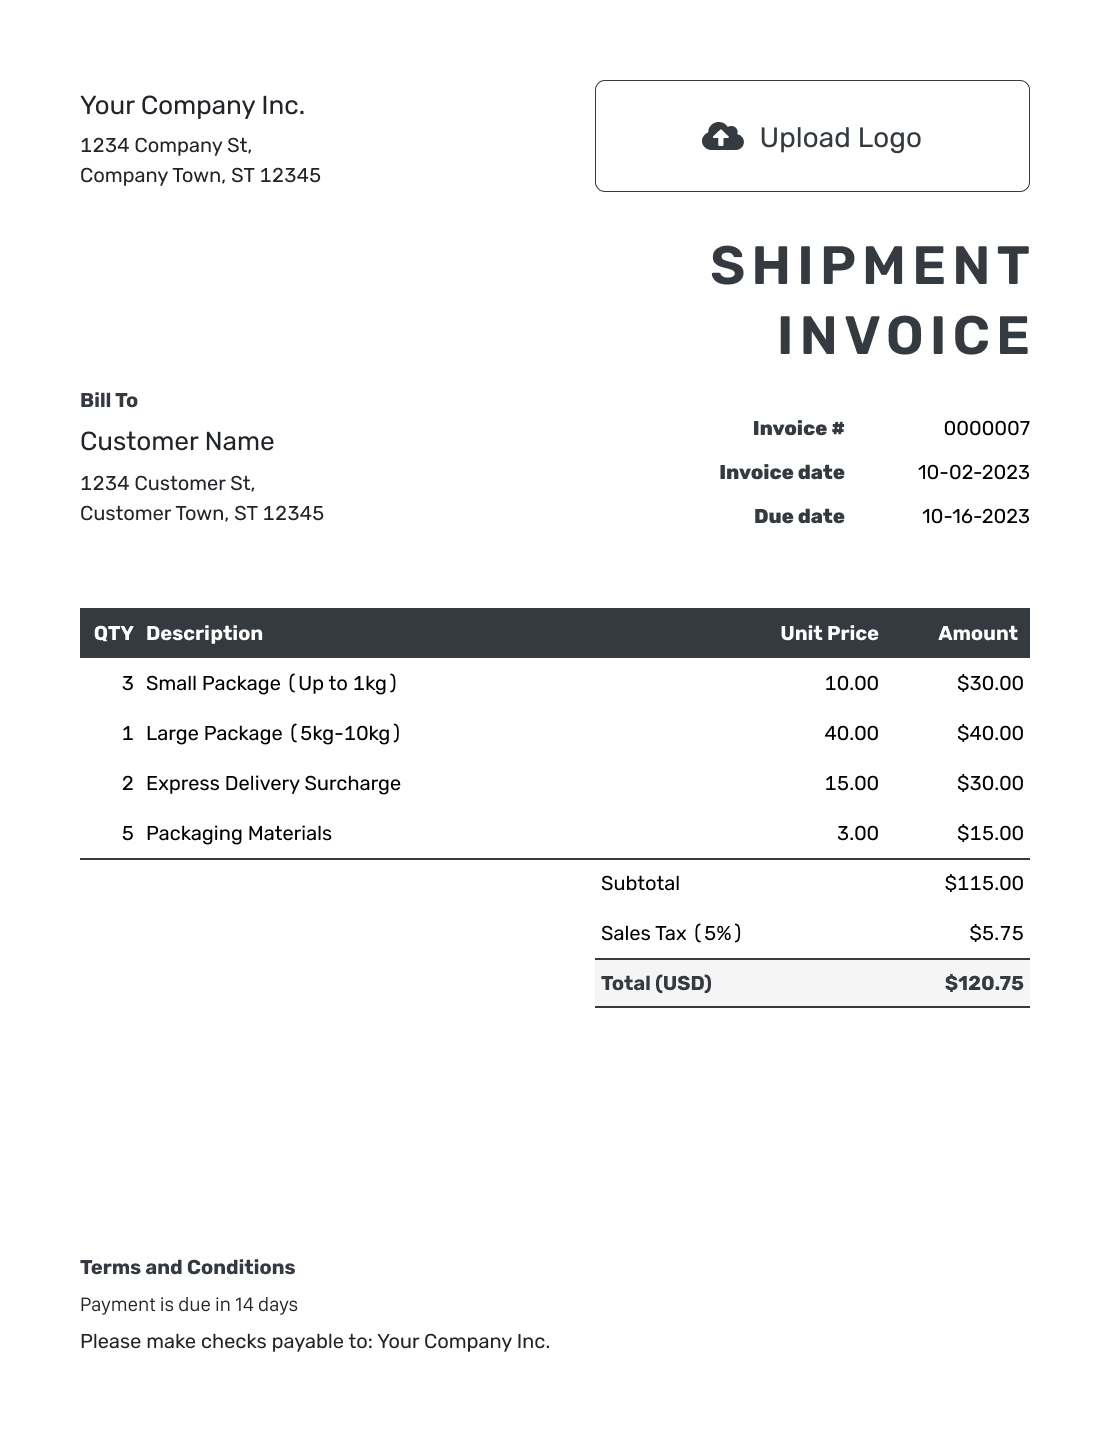 Hourly Shipment Invoice Template